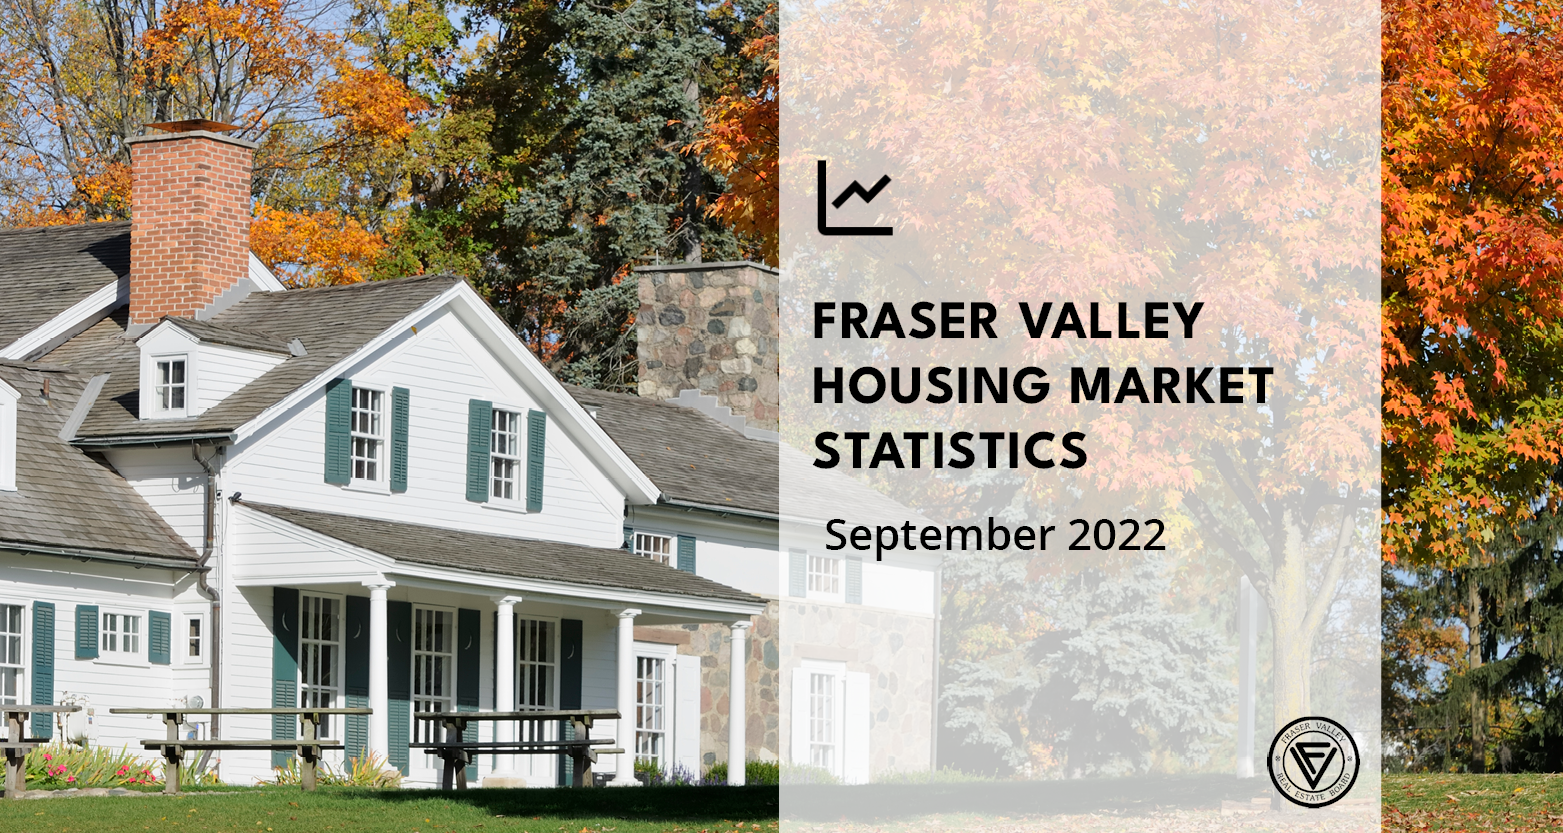 Fraser Valley real estate market continues to stabilize heading into fall season